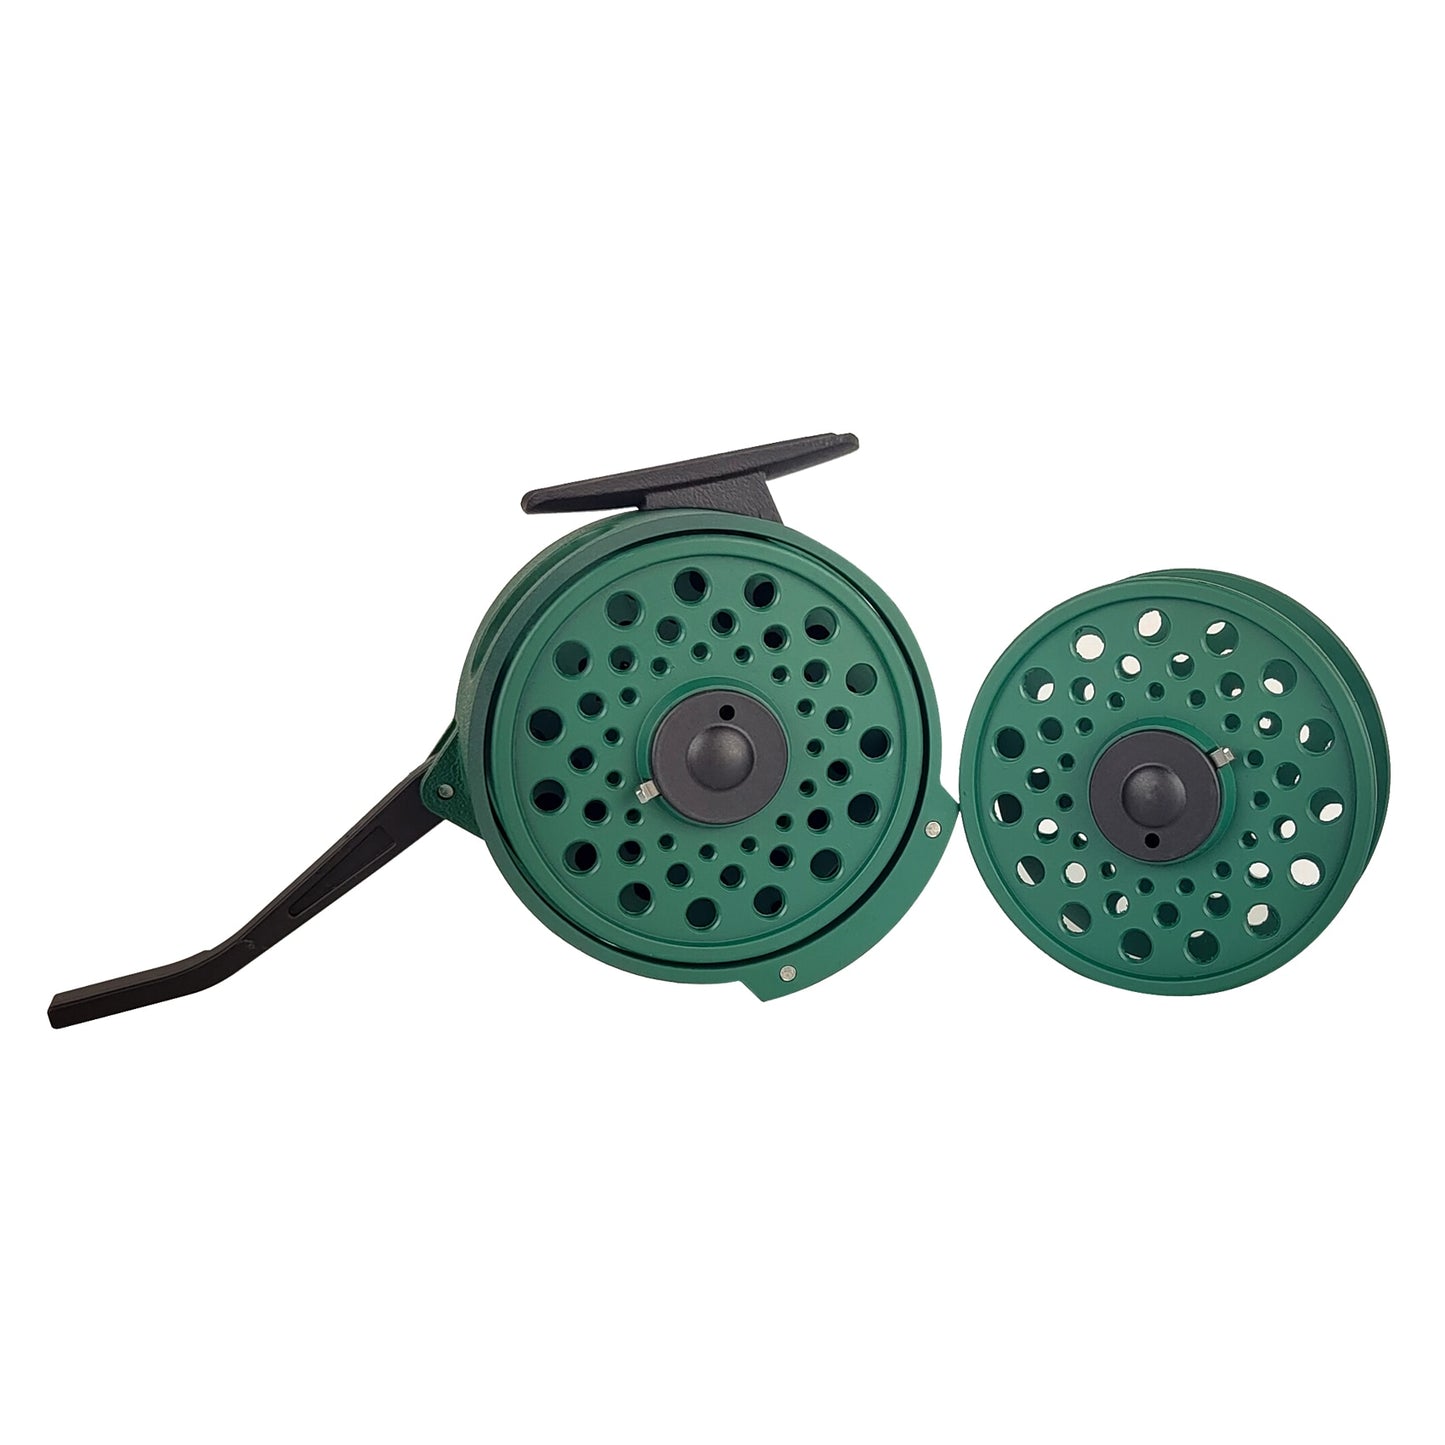 Aventik Automatic Fly Fishing Reel Super Light Nymph Fishing Reel European Design Graphite Fly Reel with Extro Spool Mesh Bag